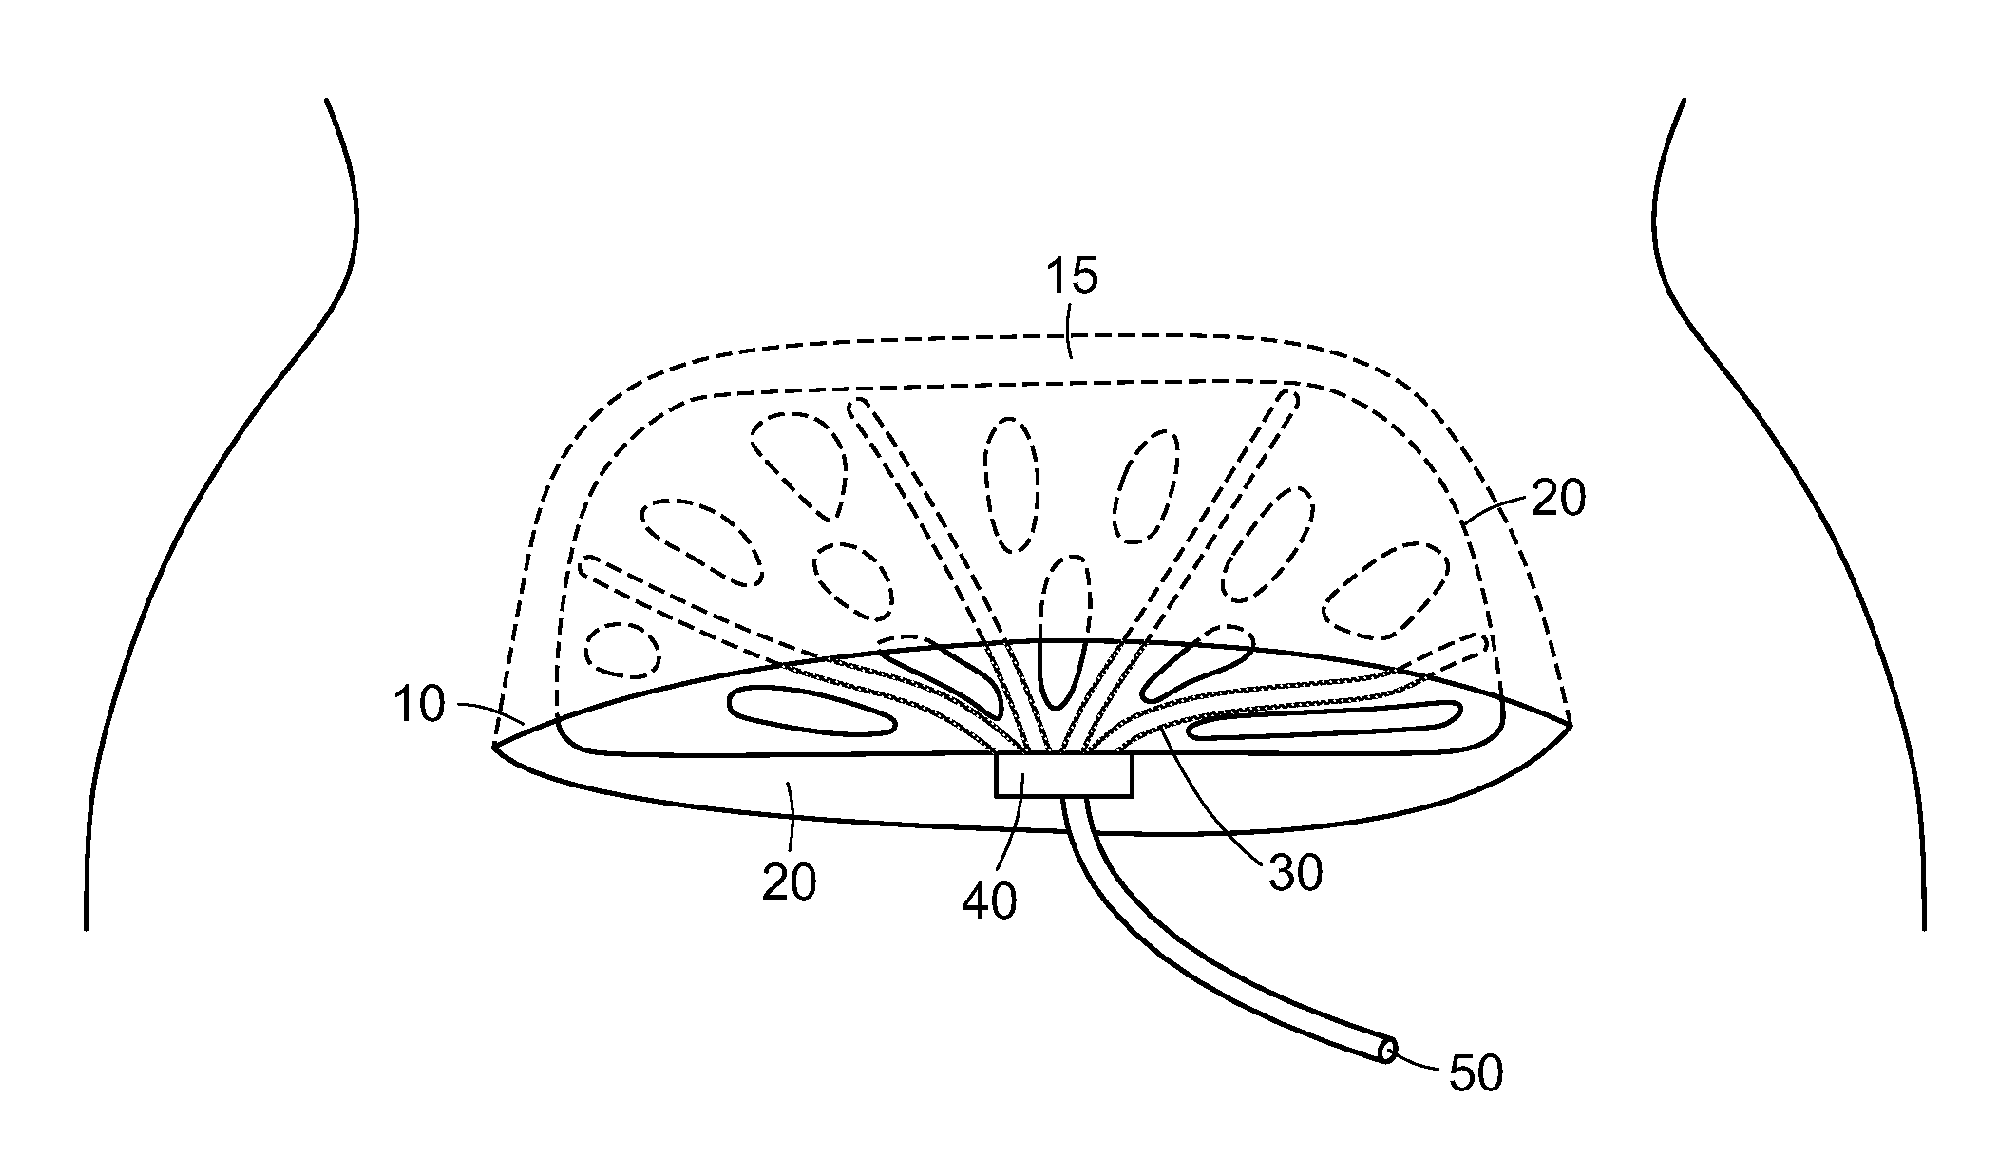 Surgical cavity drainage and closure system